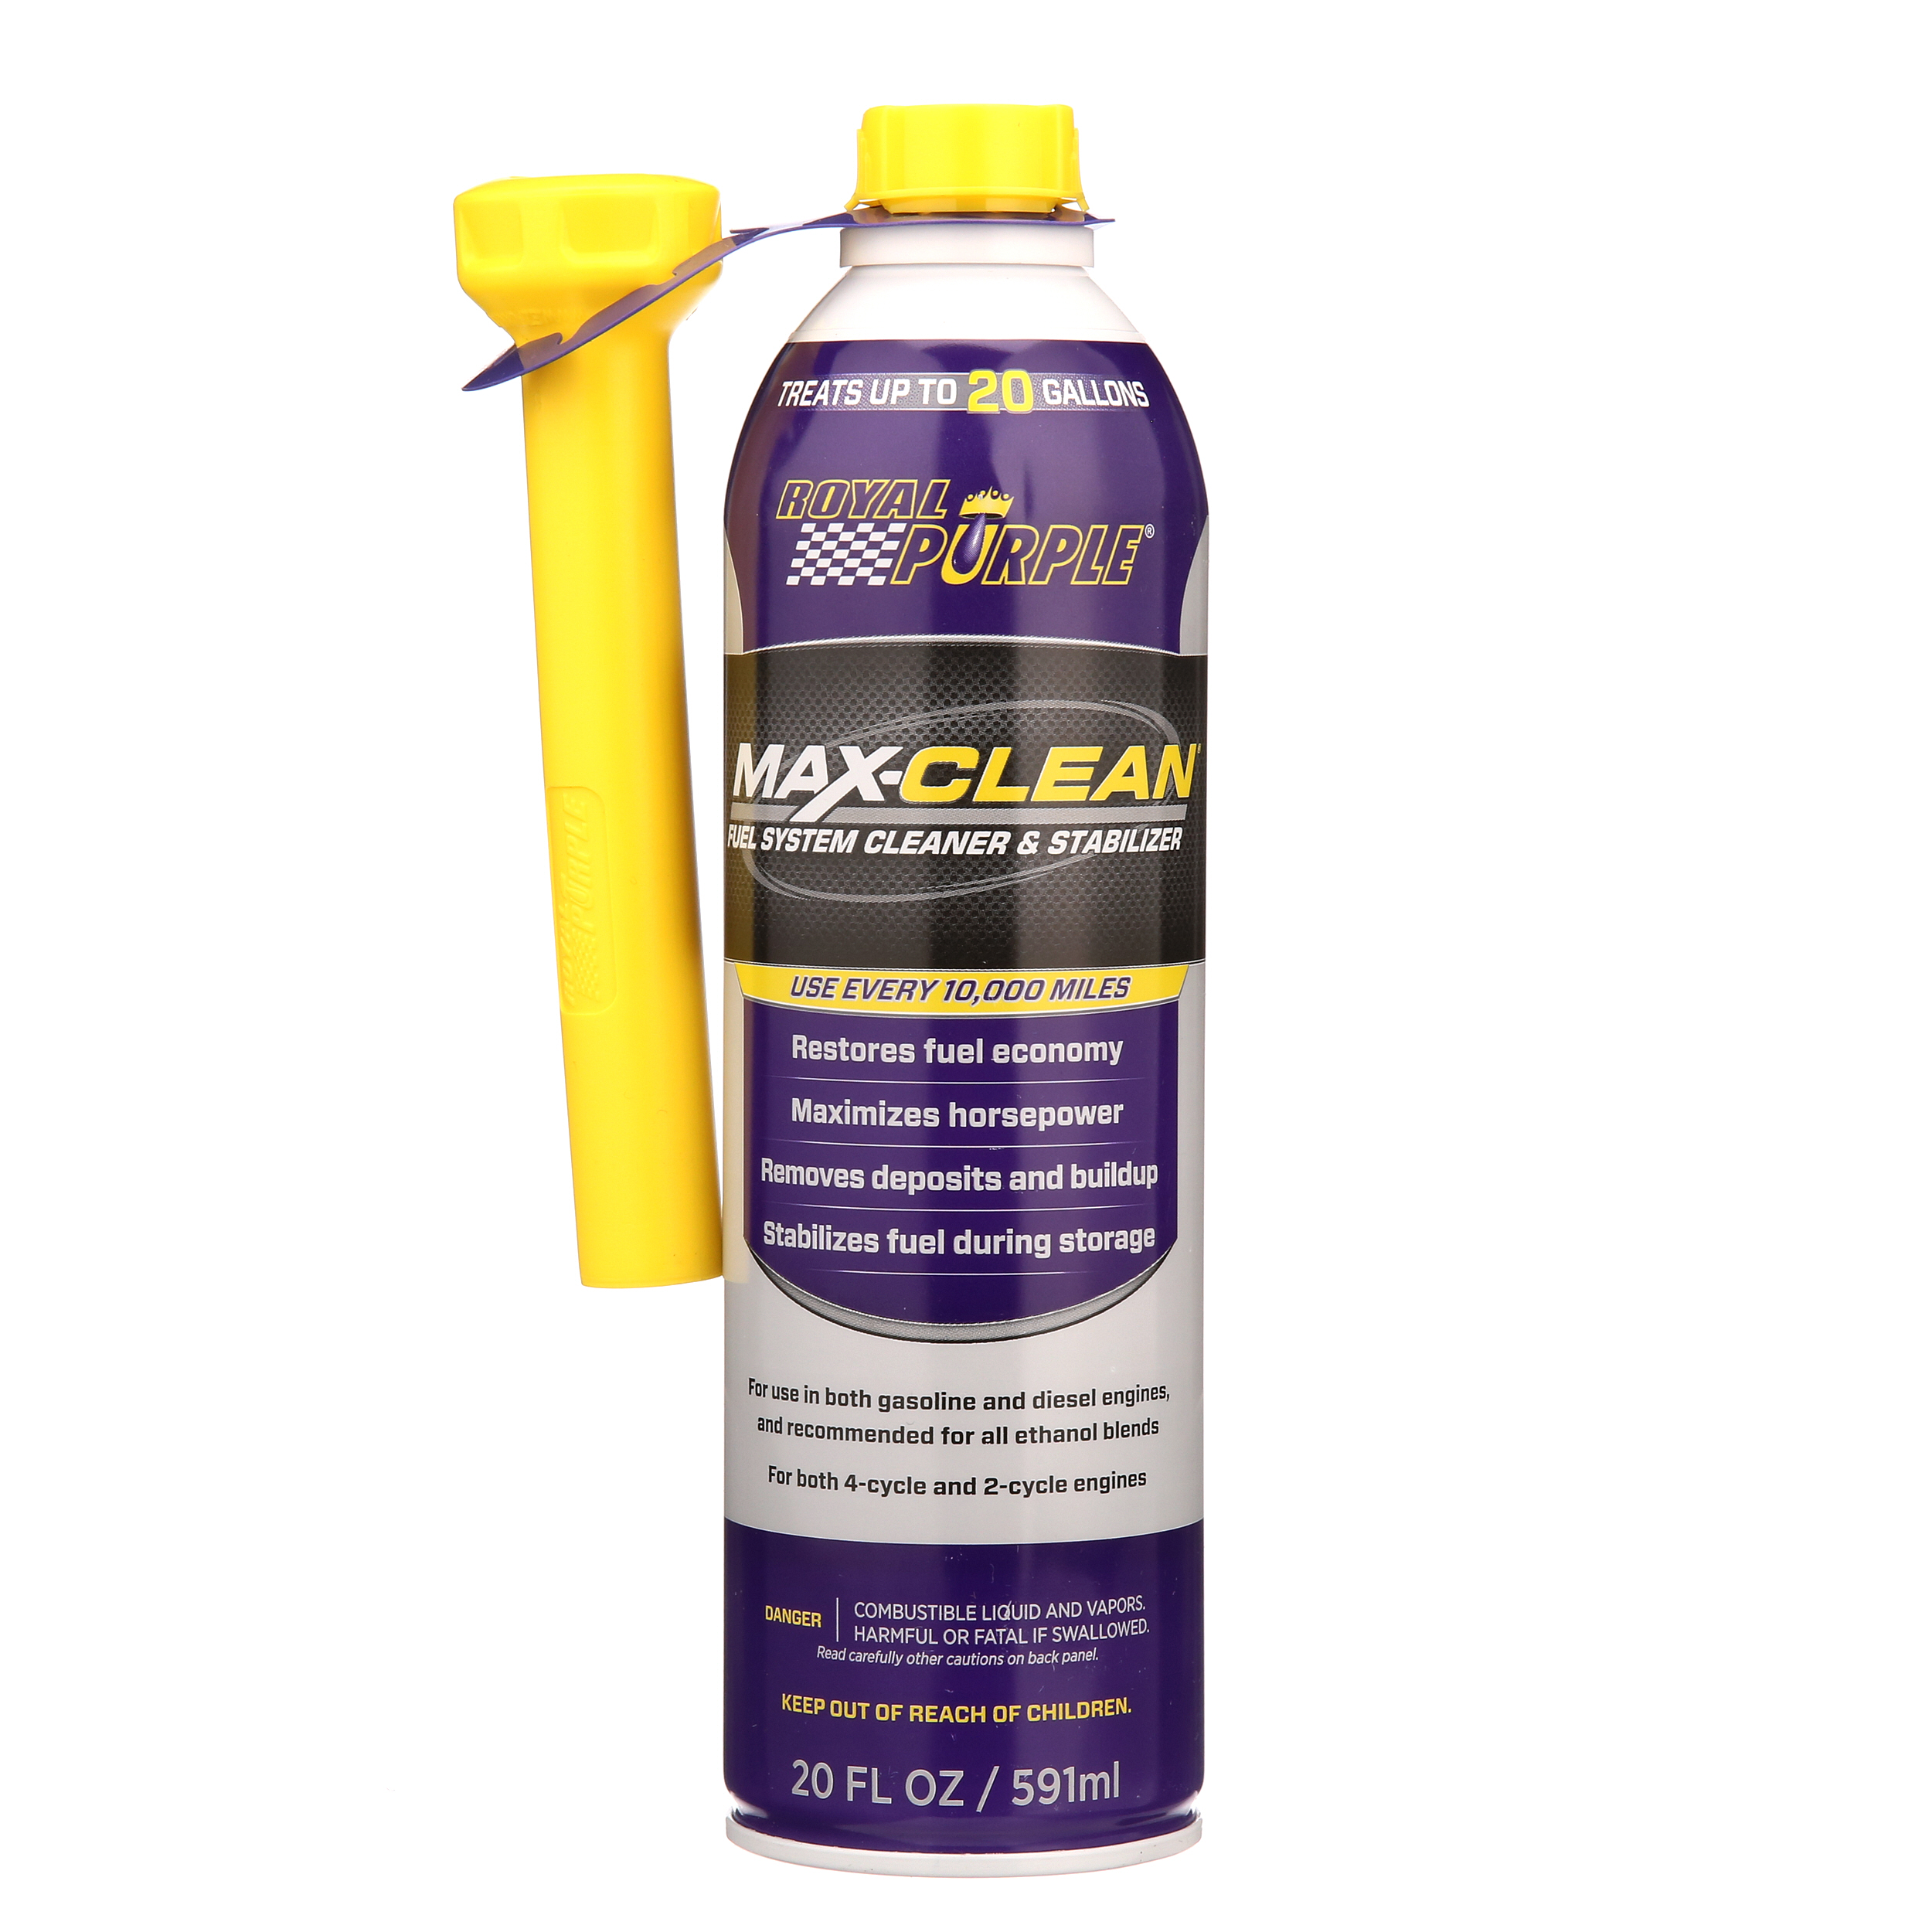 Royal Purple Max-Clean Fuel System Cleaner and Stabilizer, 20 Fl. Oz. $11.97 was $17.99